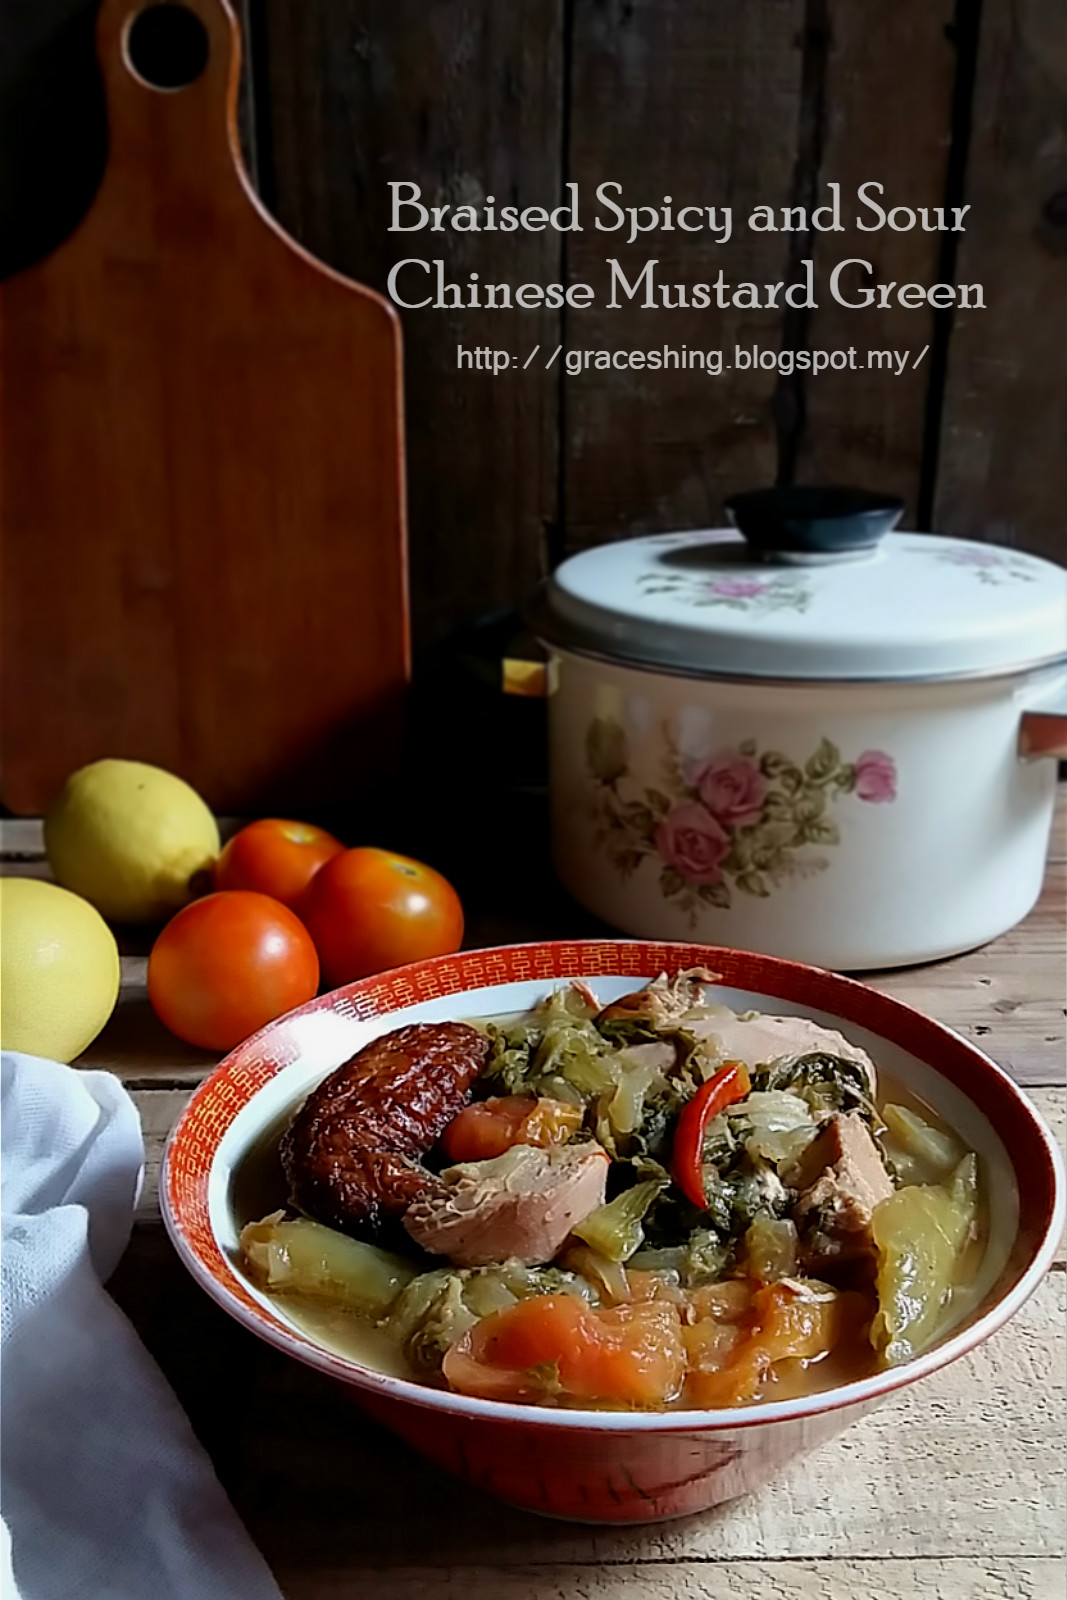 Grace's Blog 欣语心情: 酸辣芥菜 Braised Spicy and Sour Chinese Mustard Green ...